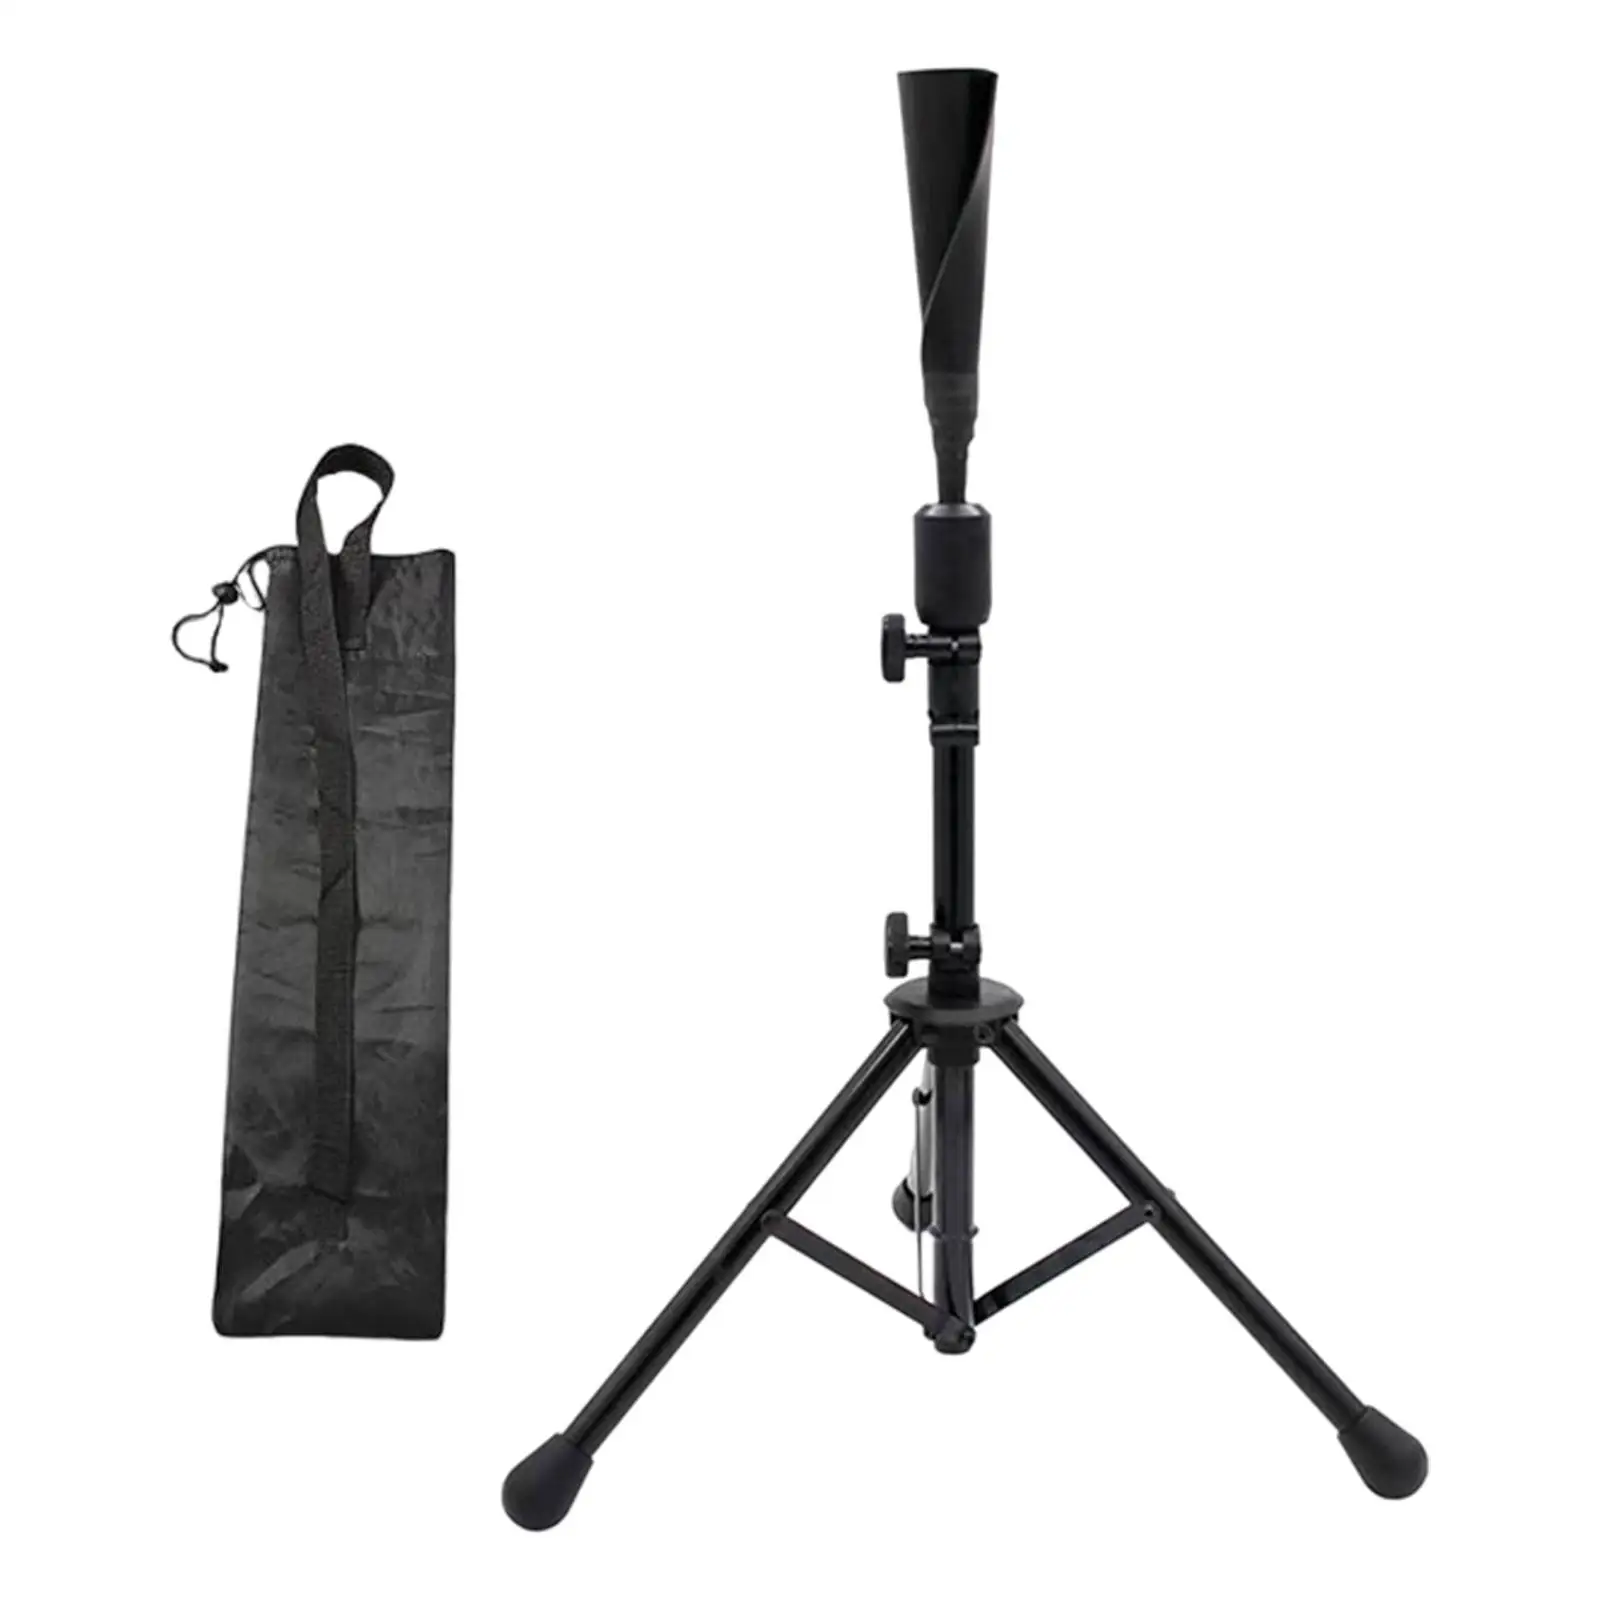 Baseball Batting Tee Professional Adjustable Height 27 to 41 Inches Portable Hitting Tee Stand for Adults Pitching Balls